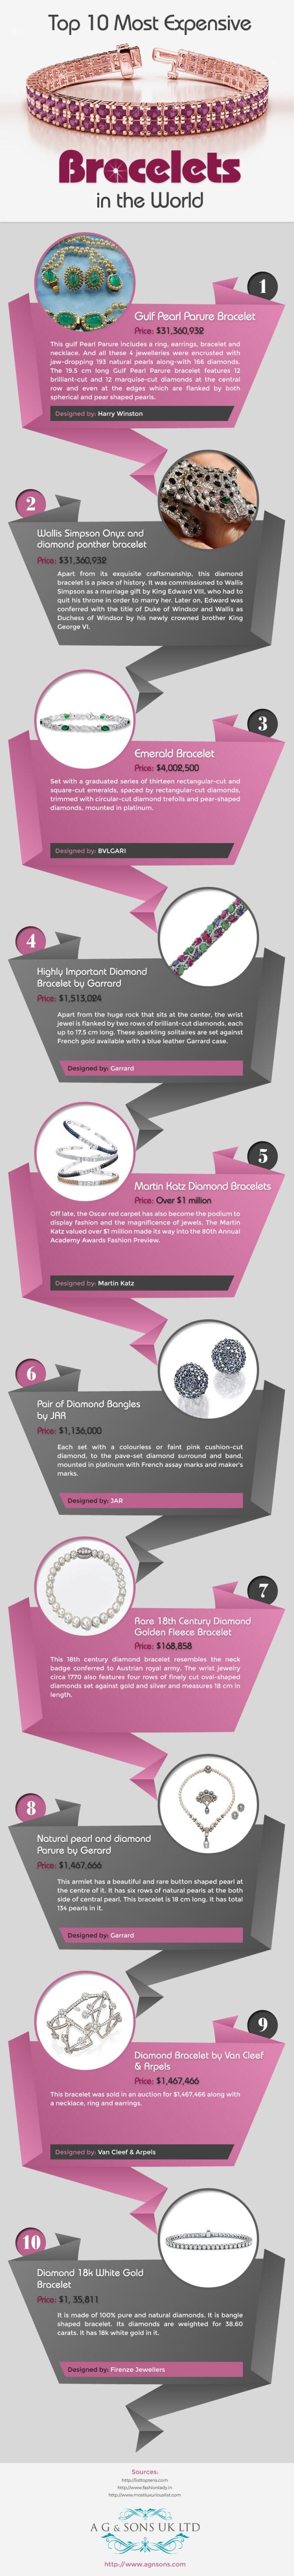 wedding photo - Top 10 Most Expensive Bracelets in the World